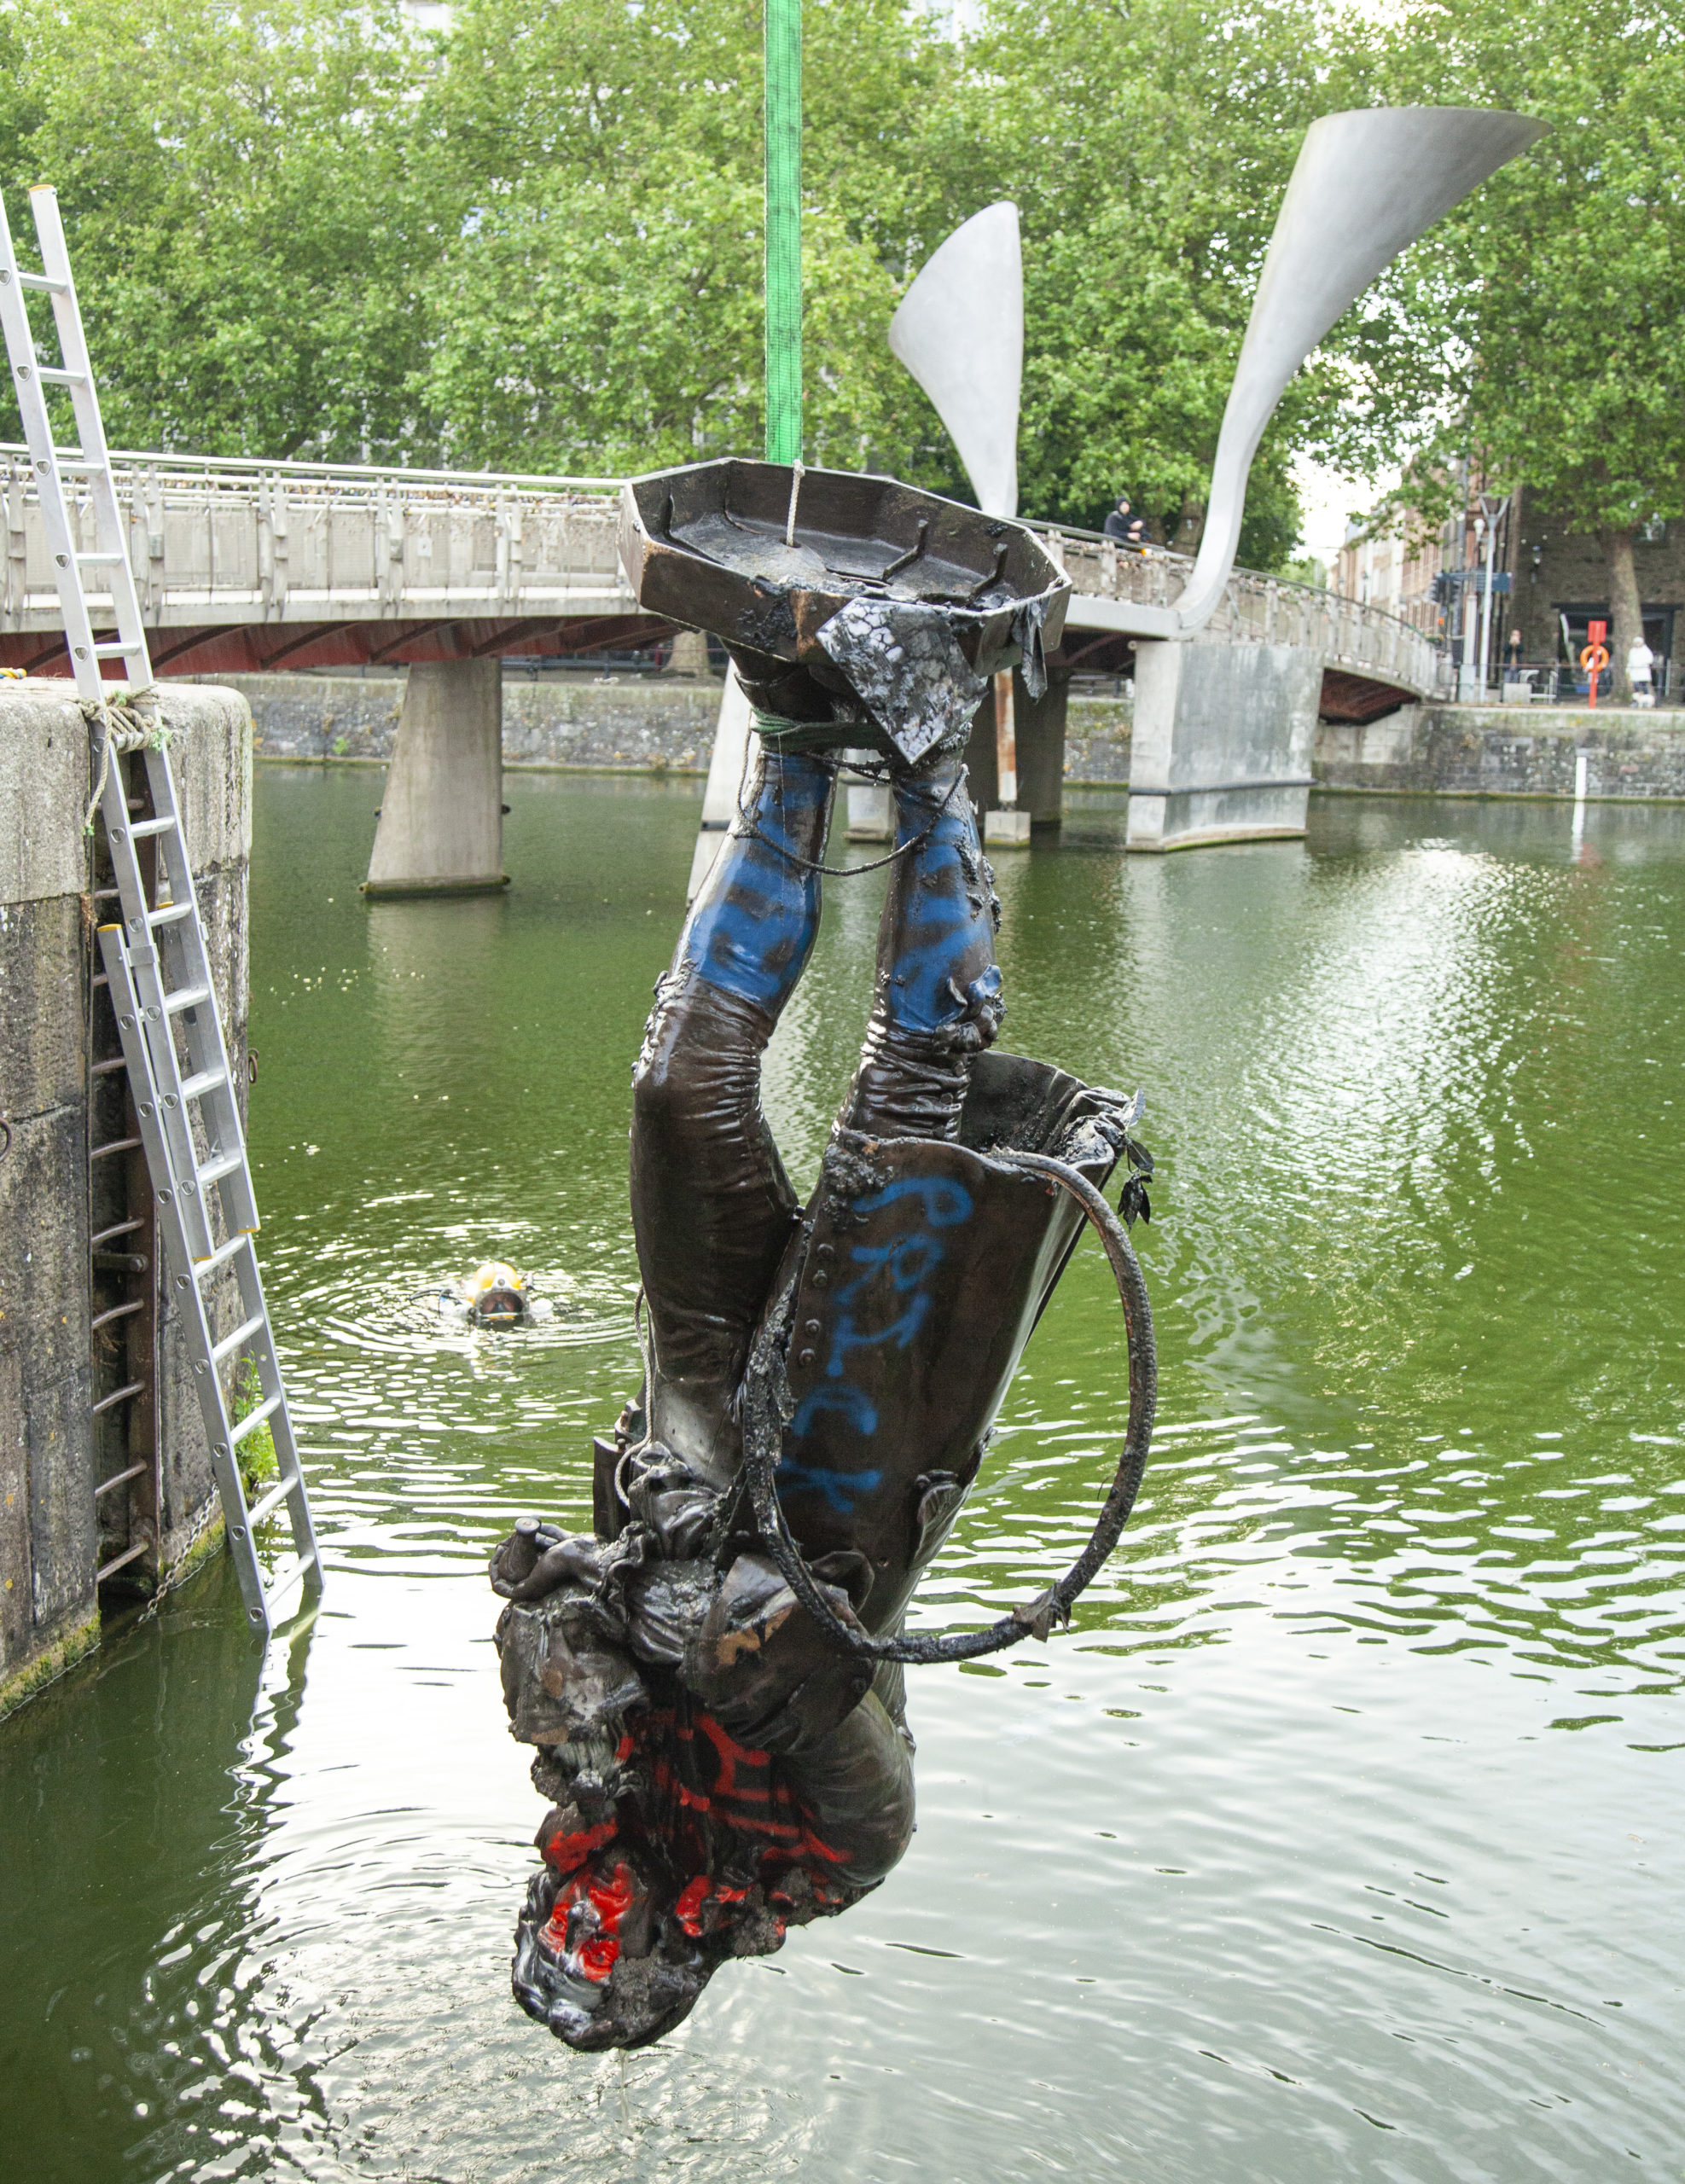 Colston statue hanging upside down, being brought up from Bristol harbour. It is painted in blue and red paint and has a tyre attached. Bridge in the background. Image Caption: Colston statue being brought up from Bristol harbour (© Bristol City Council)